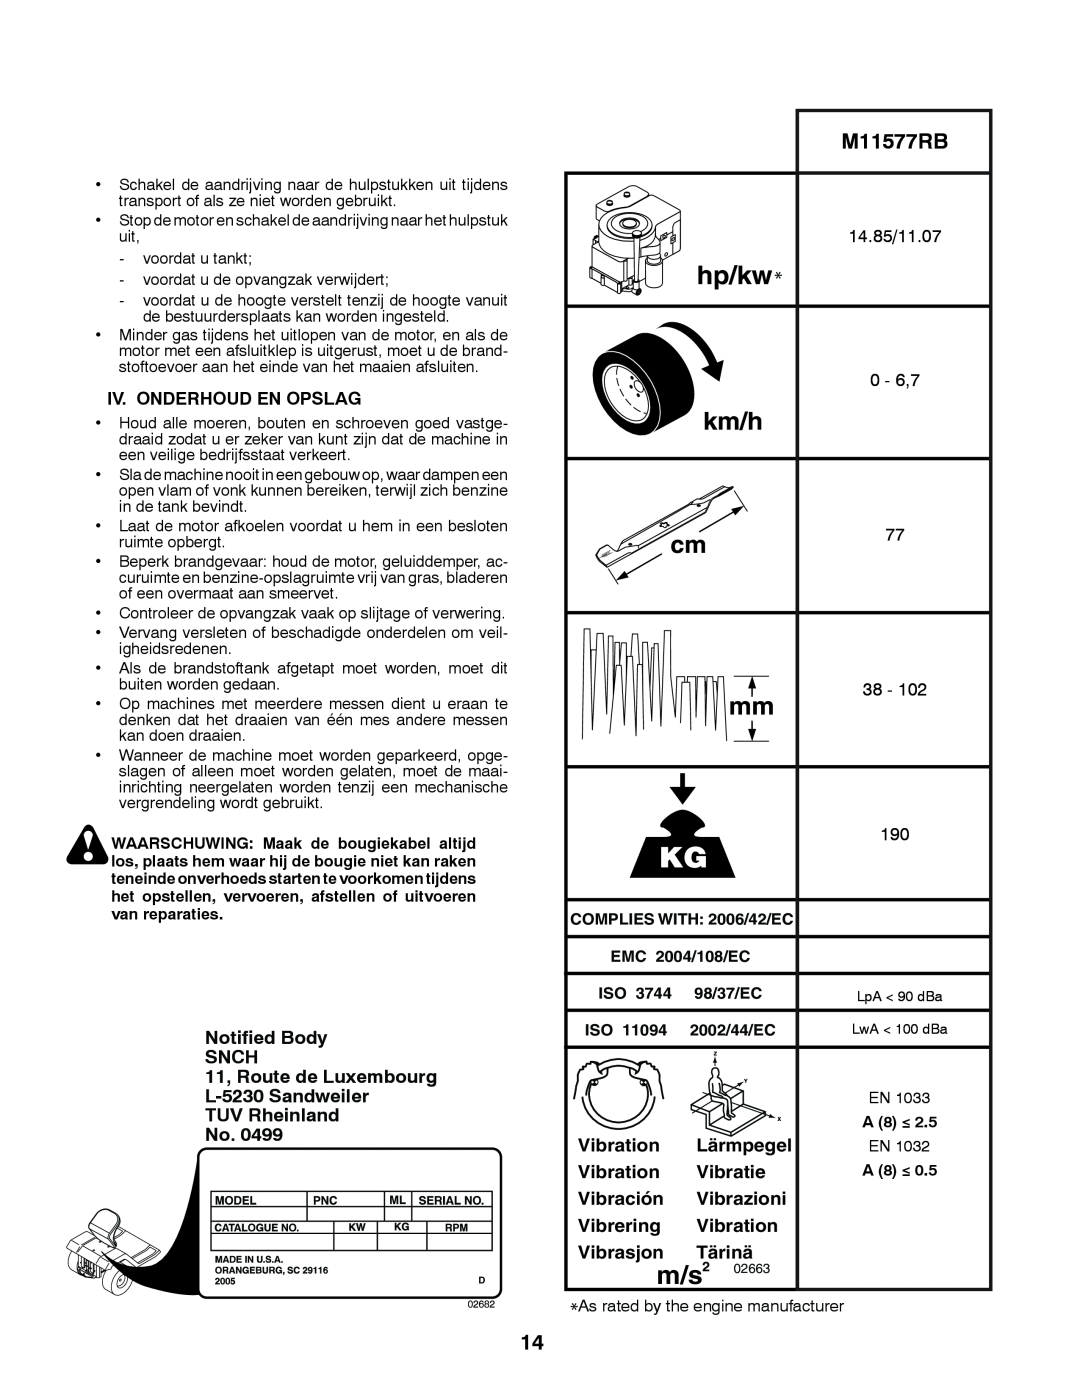 McCulloch 96041016500 instruction manual m/s2, M11577RB 